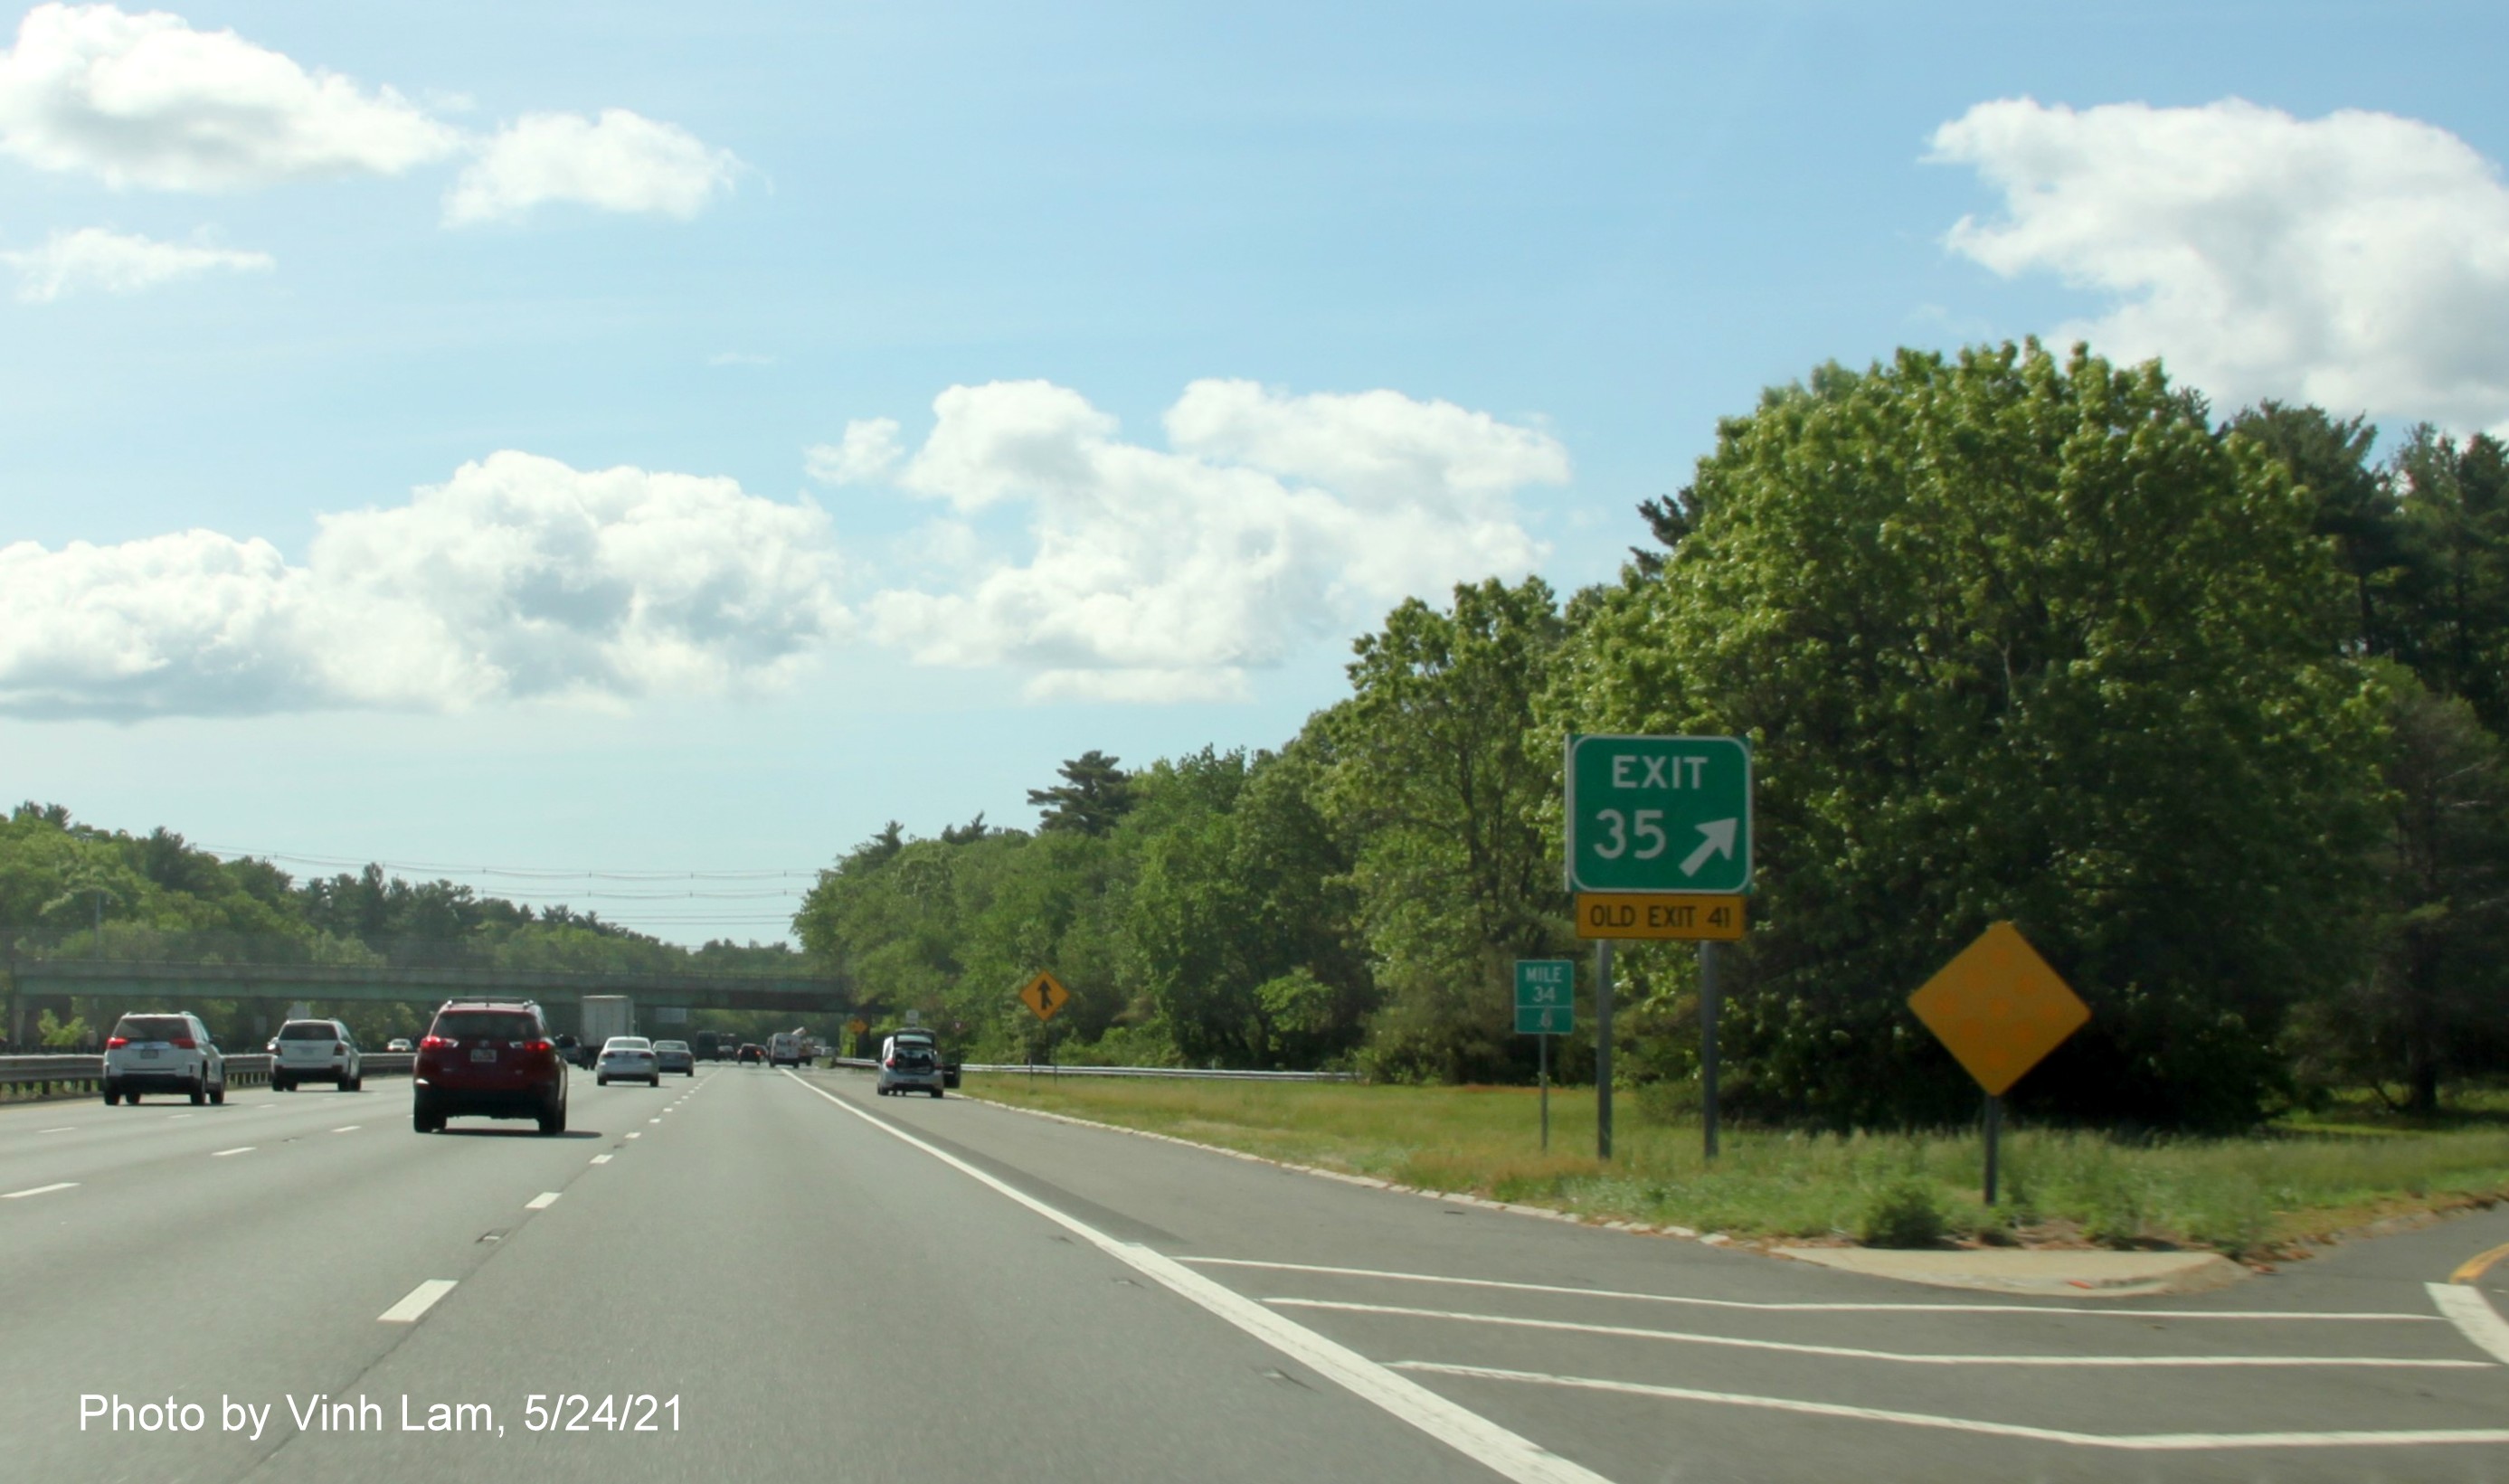 Image of gore sign for MA 125 exit with new milepost based exit number and yellow Old Exit 41 sign attached below on I-93 South in Wilmington, by Vinh Lam, May 2021